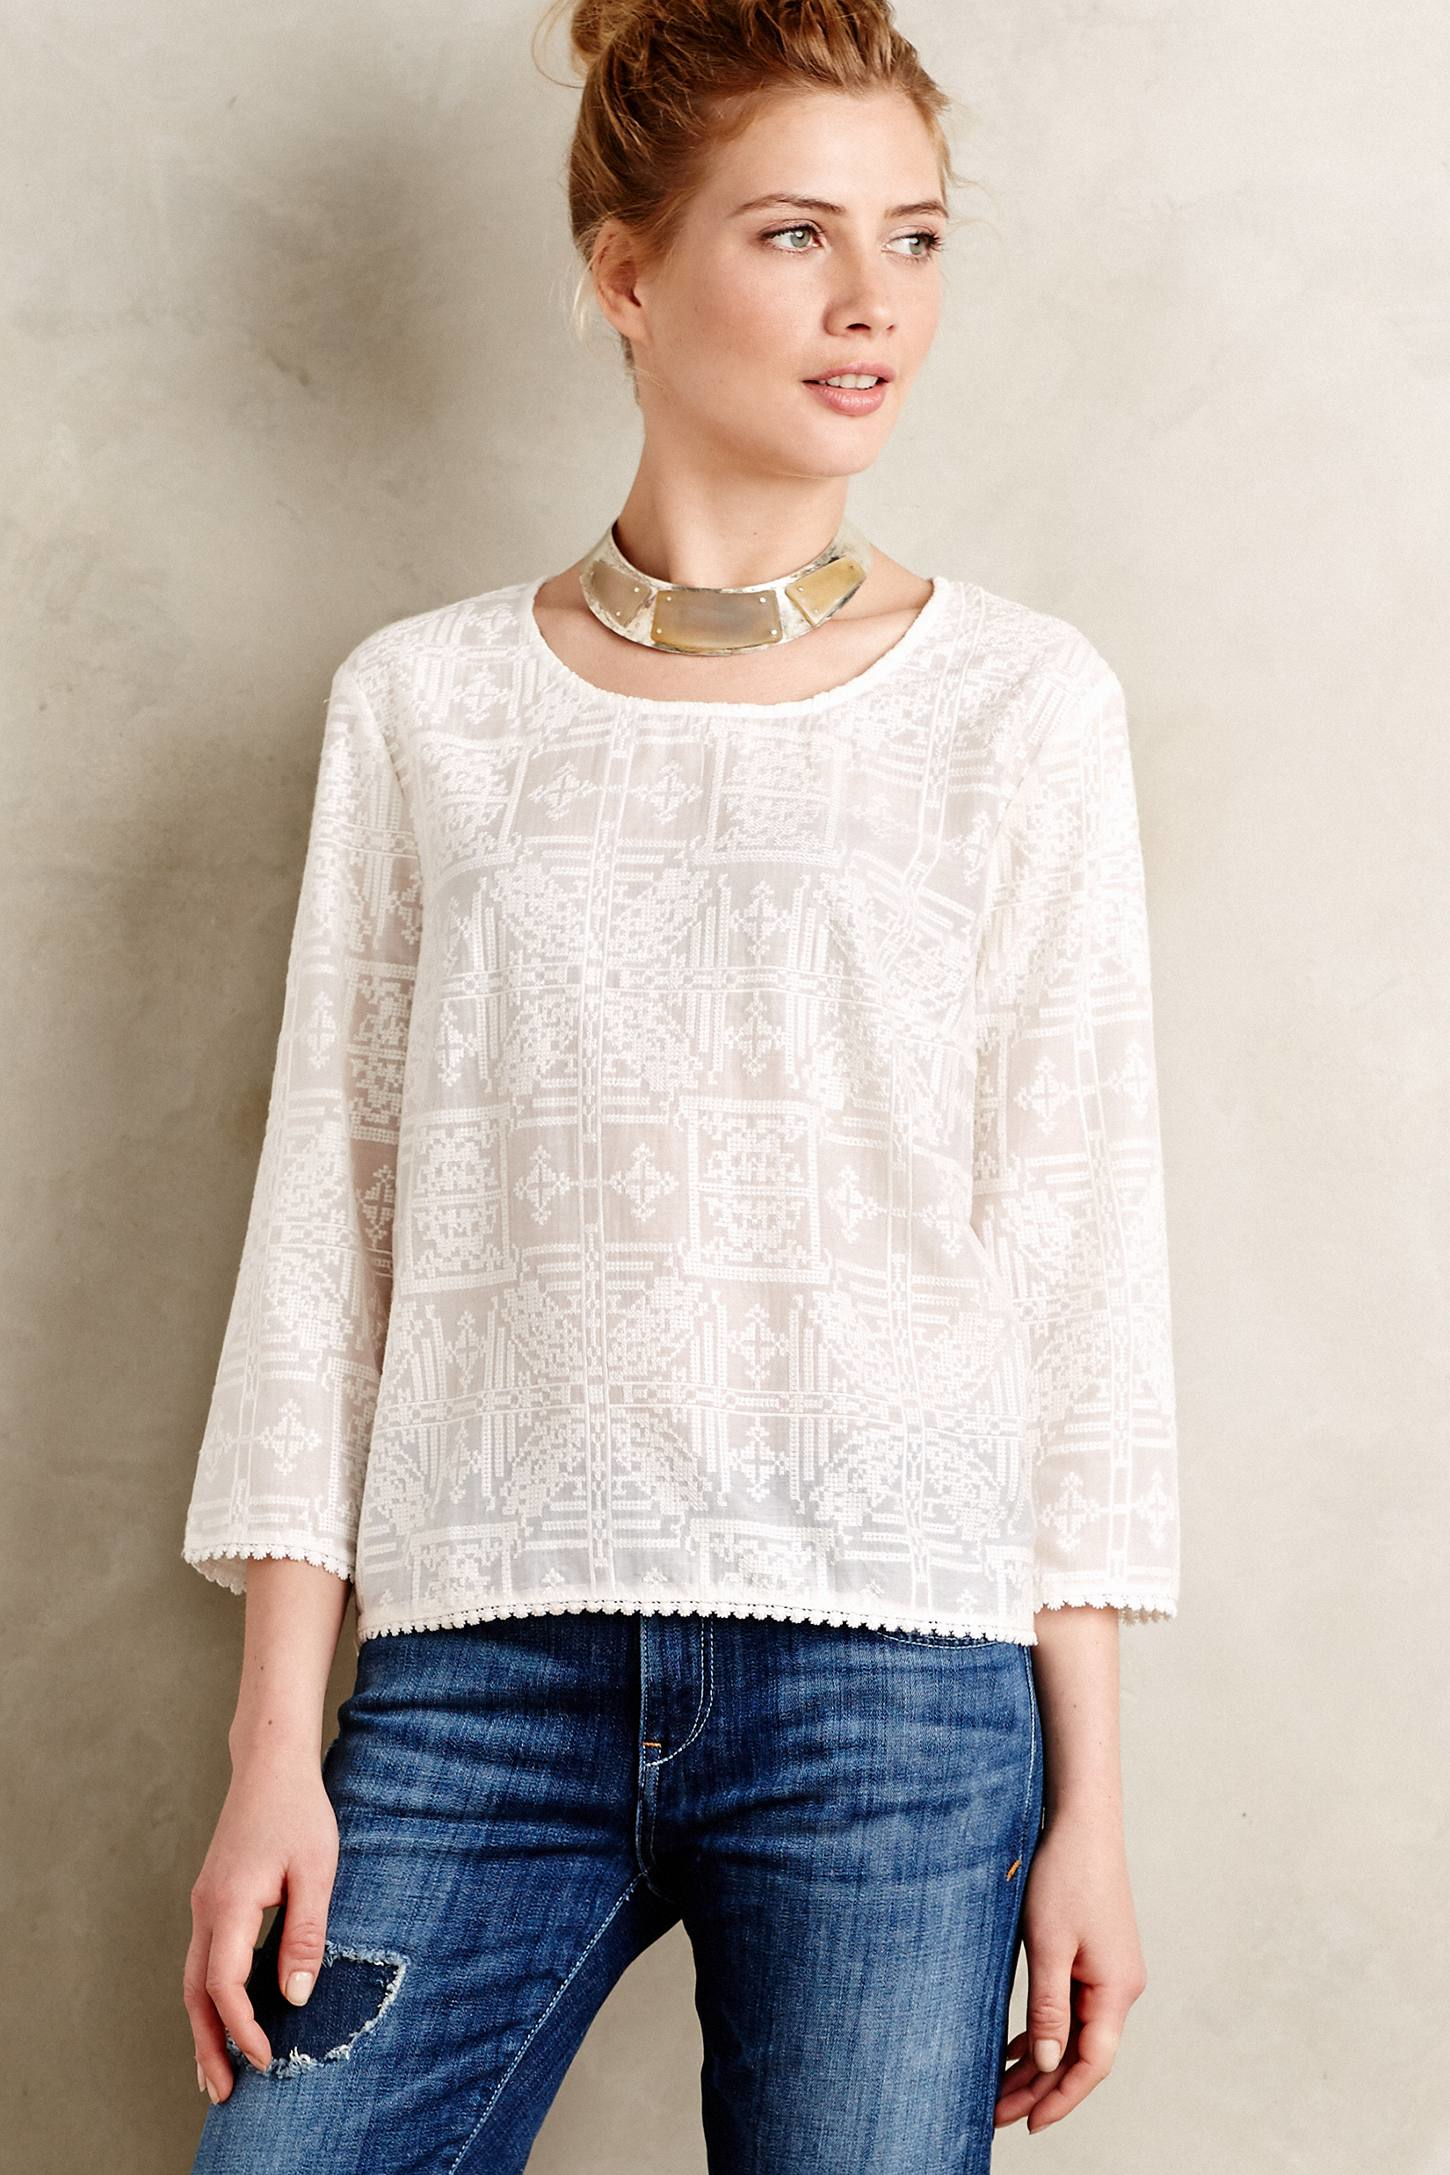 Lyst - Maeve Embroidered Aruna Top in White